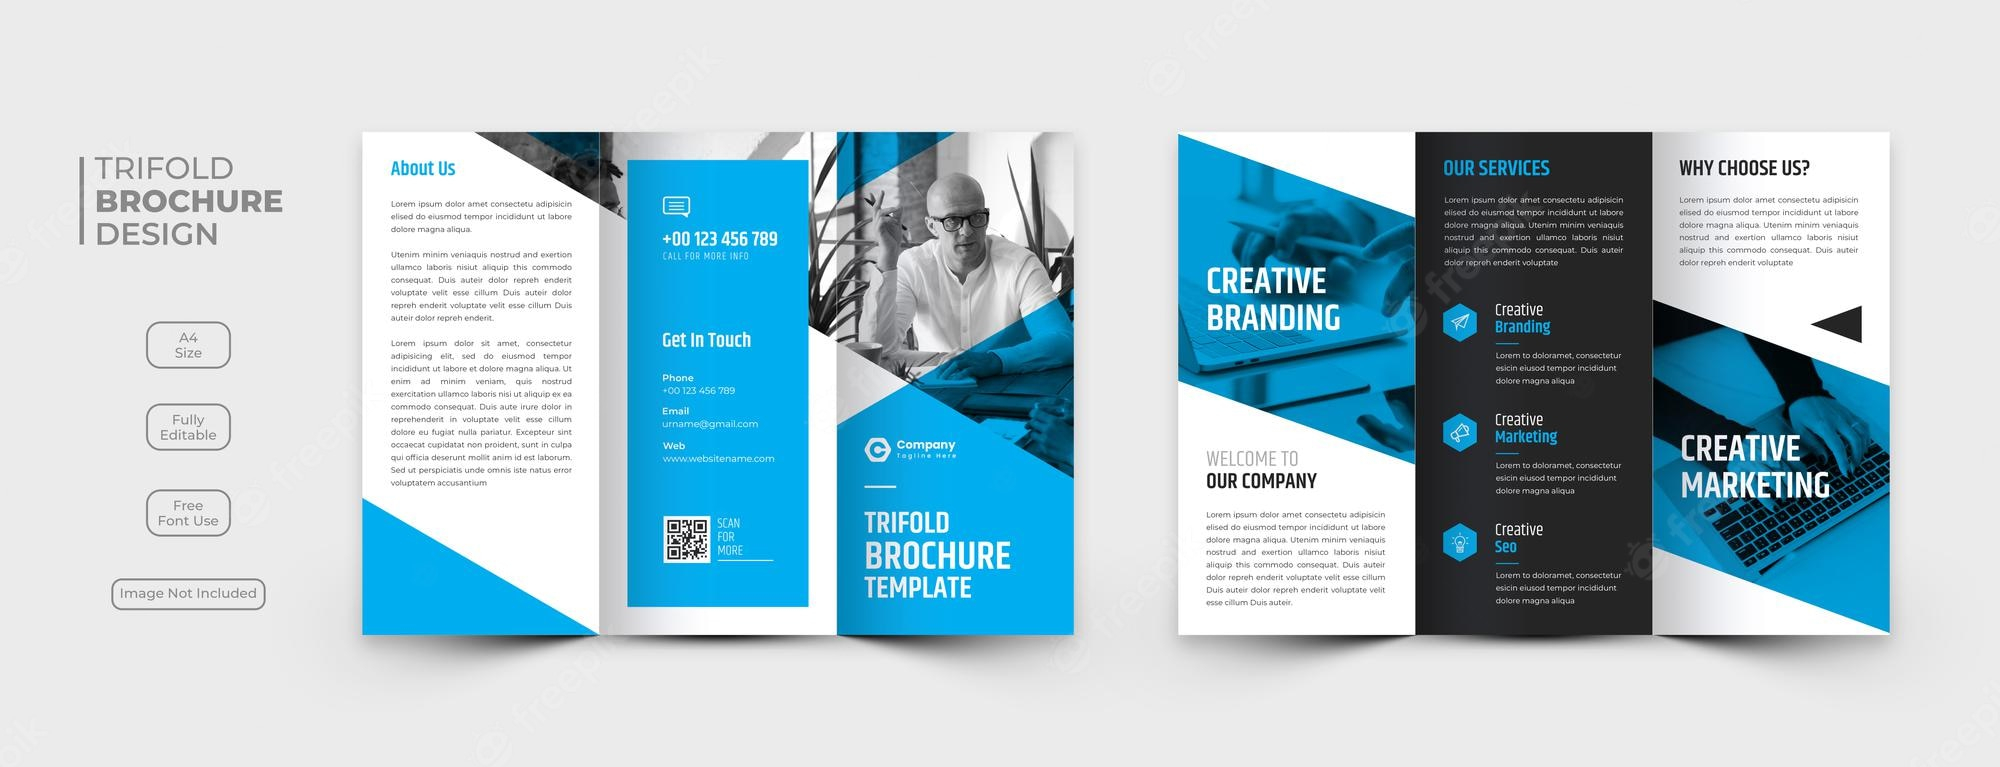 Brochure template - Free Vectors & PSD Download Intended For Free Online Tri Fold Brochure Template